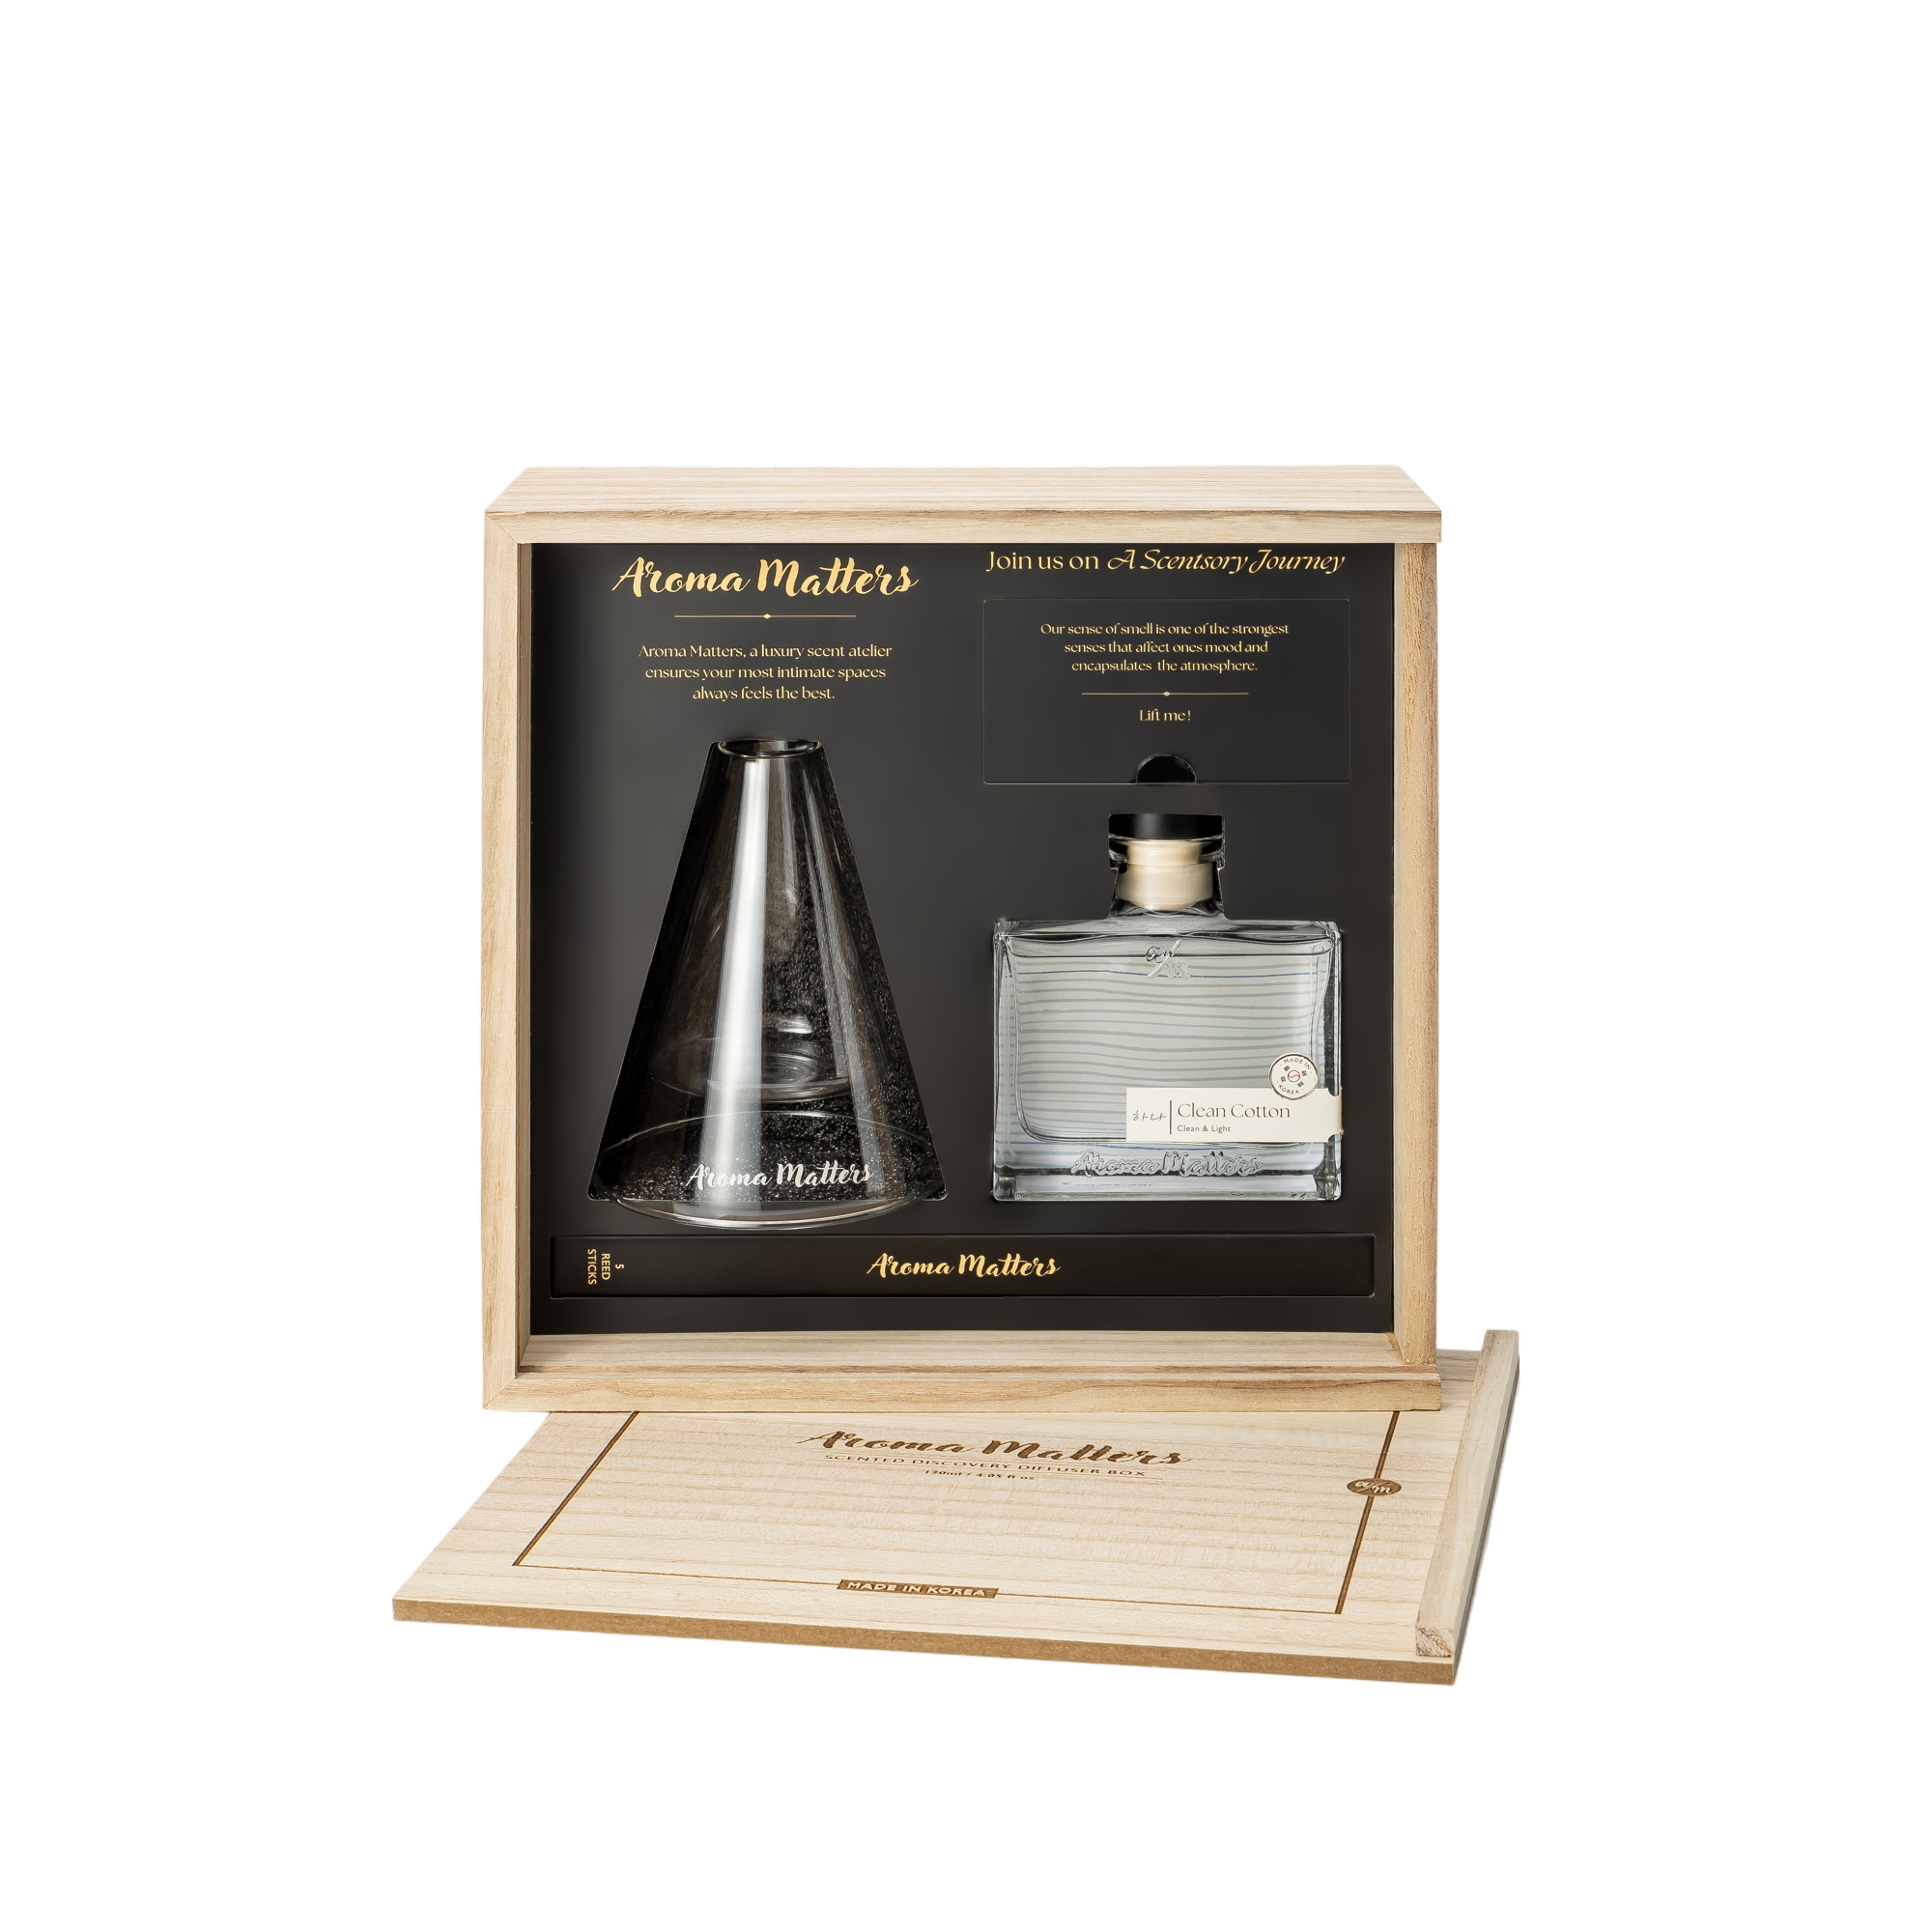 Aroma Matters - Clean Cotton Scented Discovery Diffuser Box (250ml)